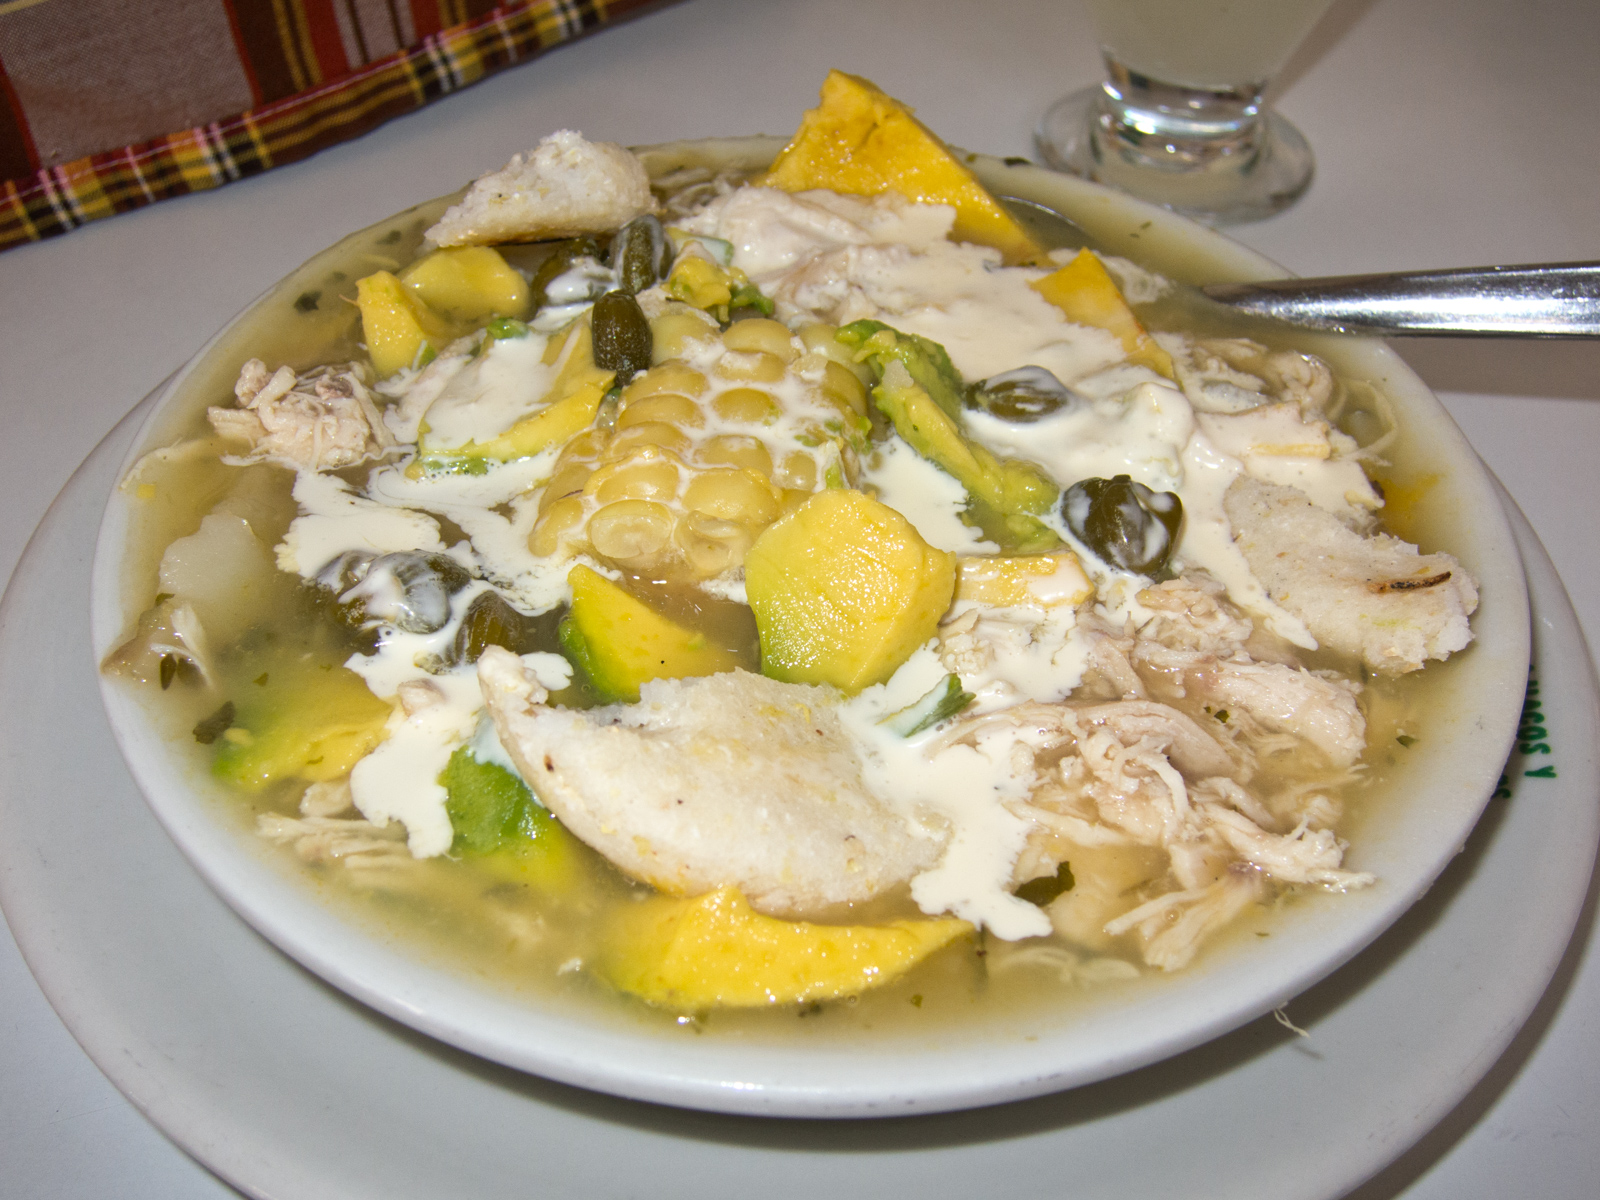 Ajiaco soup is the author's favorite Colombian food!